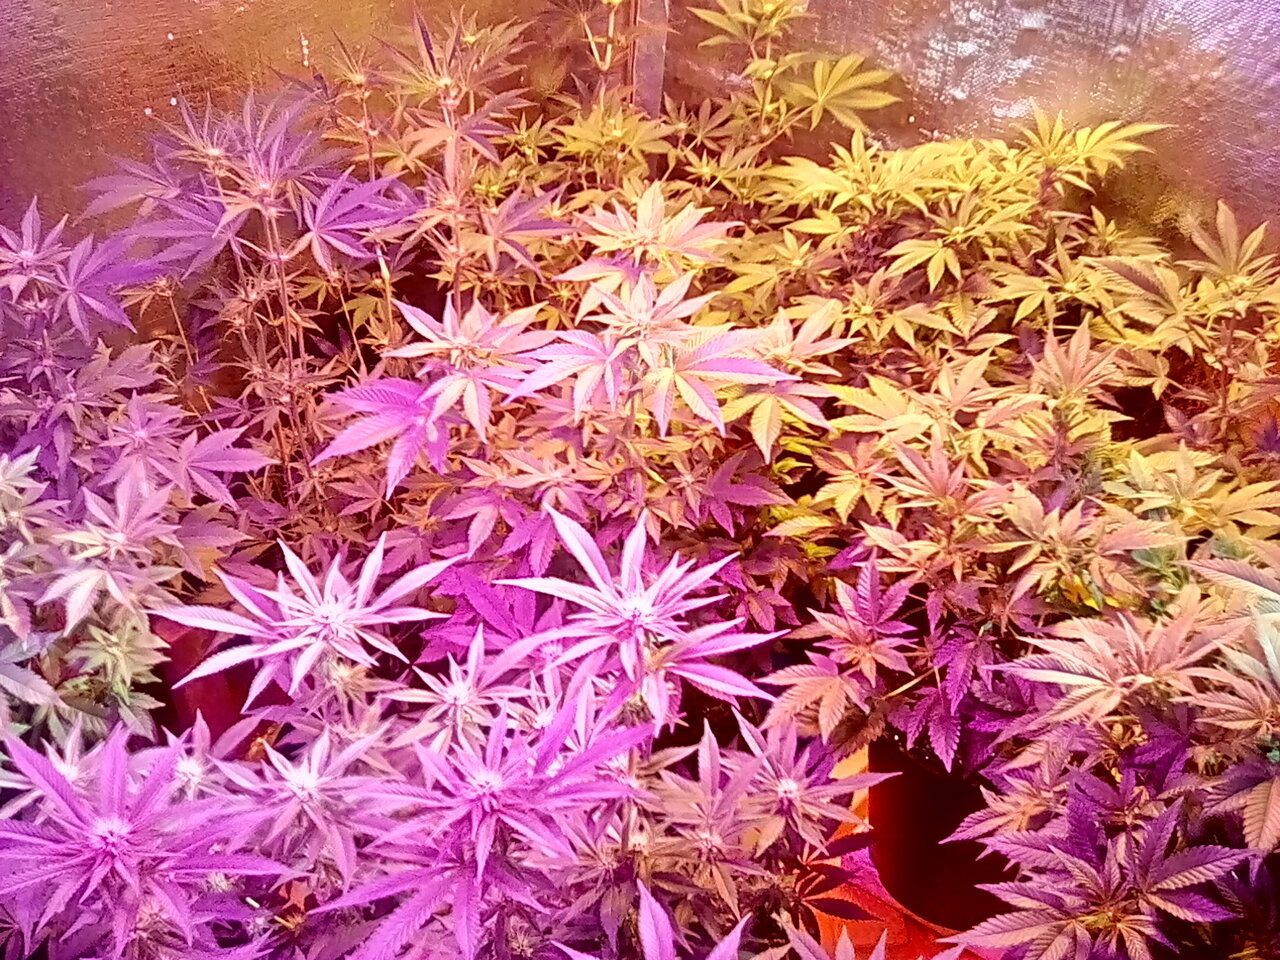 Day 24 400 watts hps with 3500 watts led.